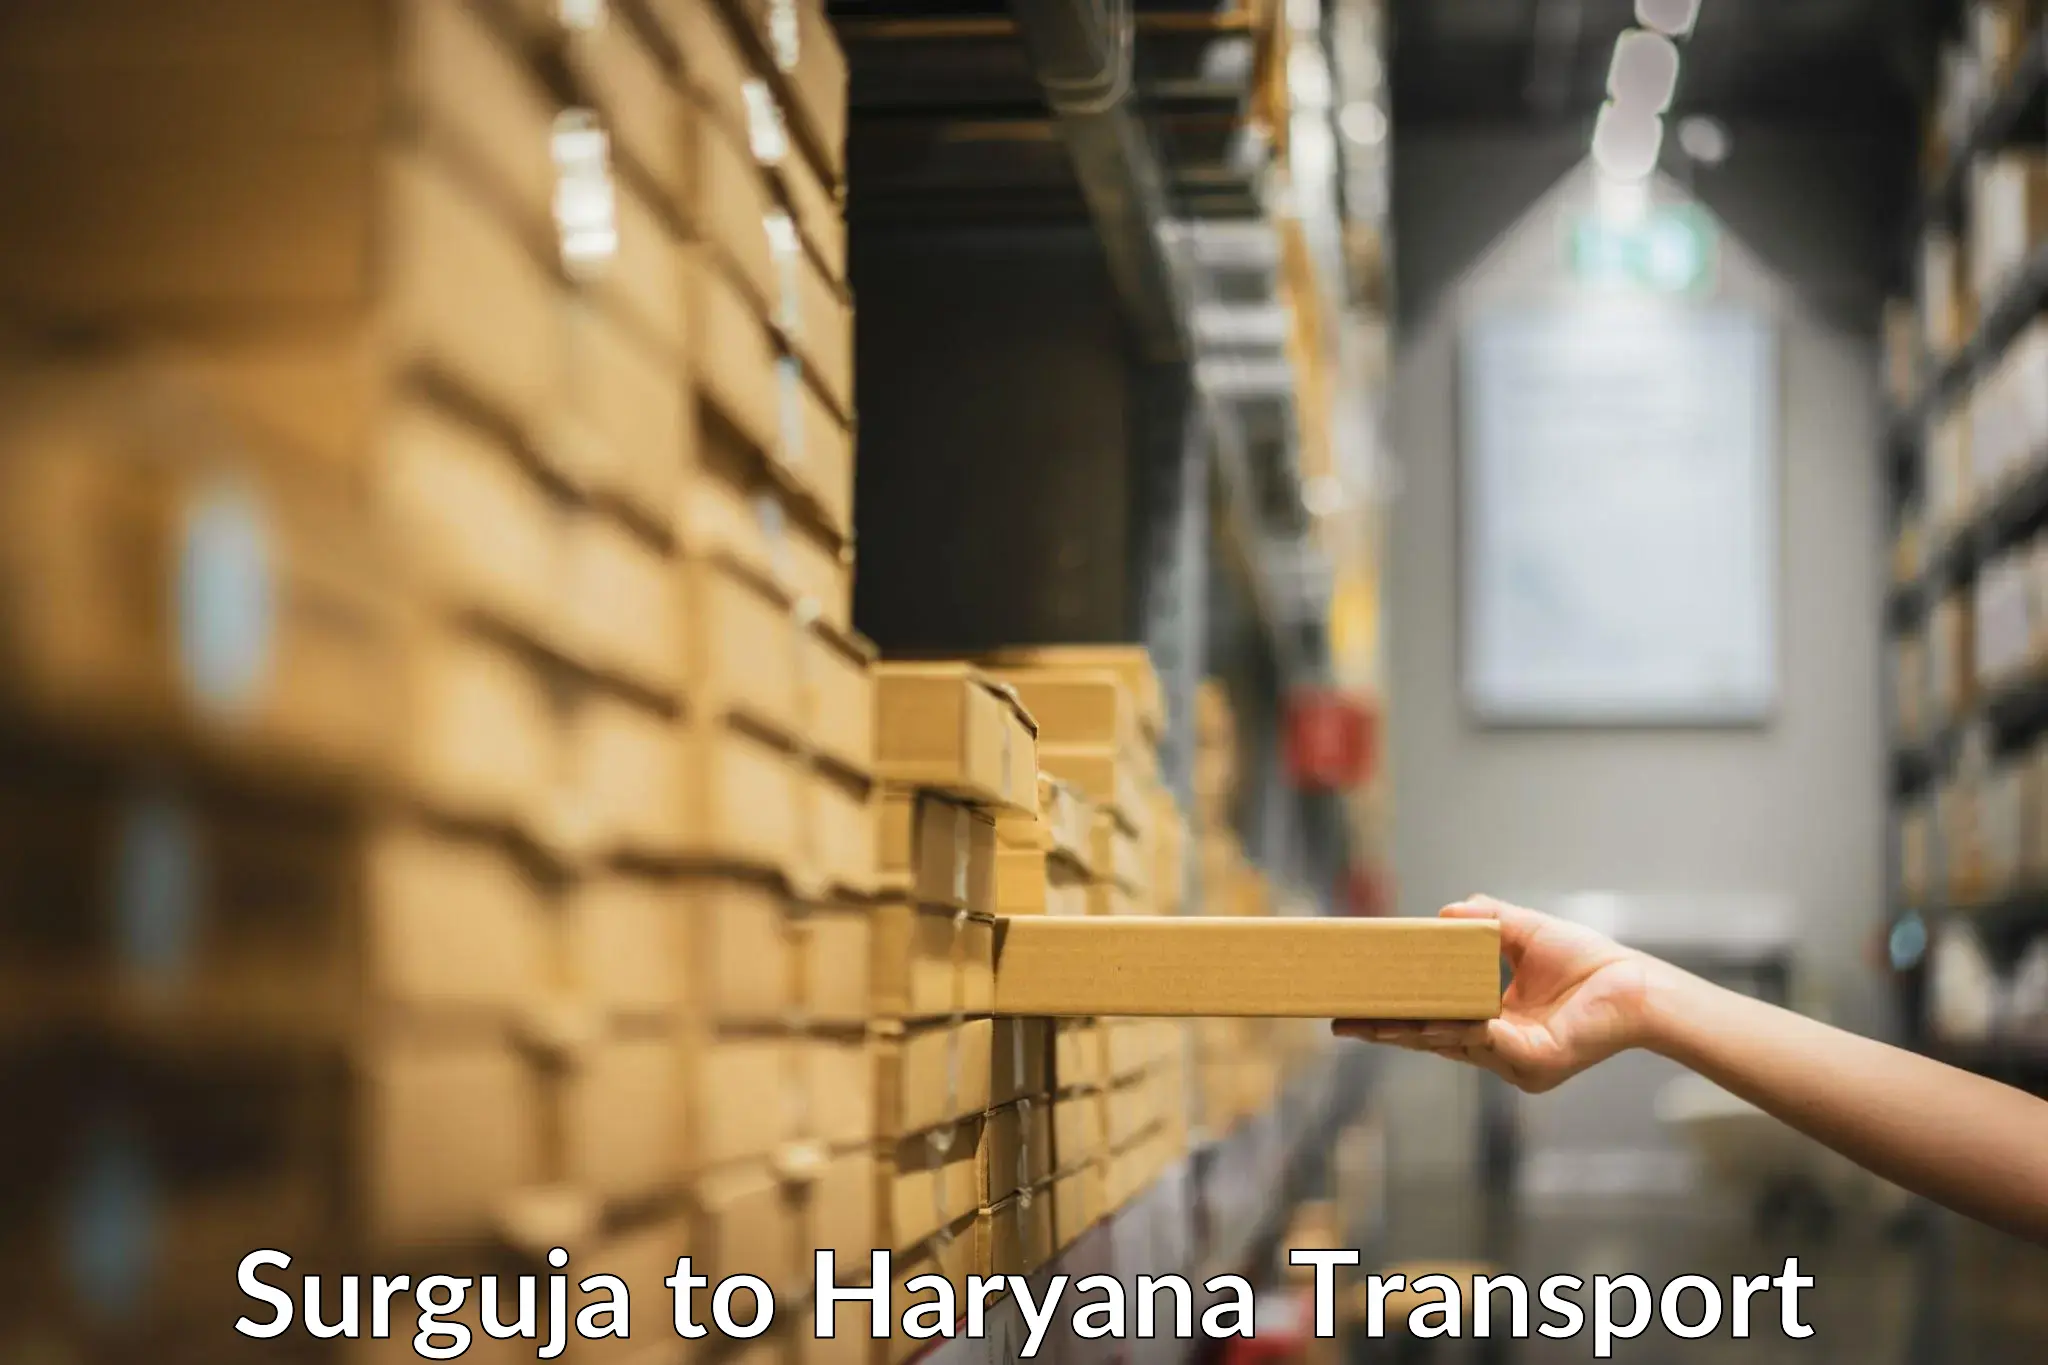 Land transport services in Surguja to Chaudhary Charan Singh Haryana Agricultural University Hisar